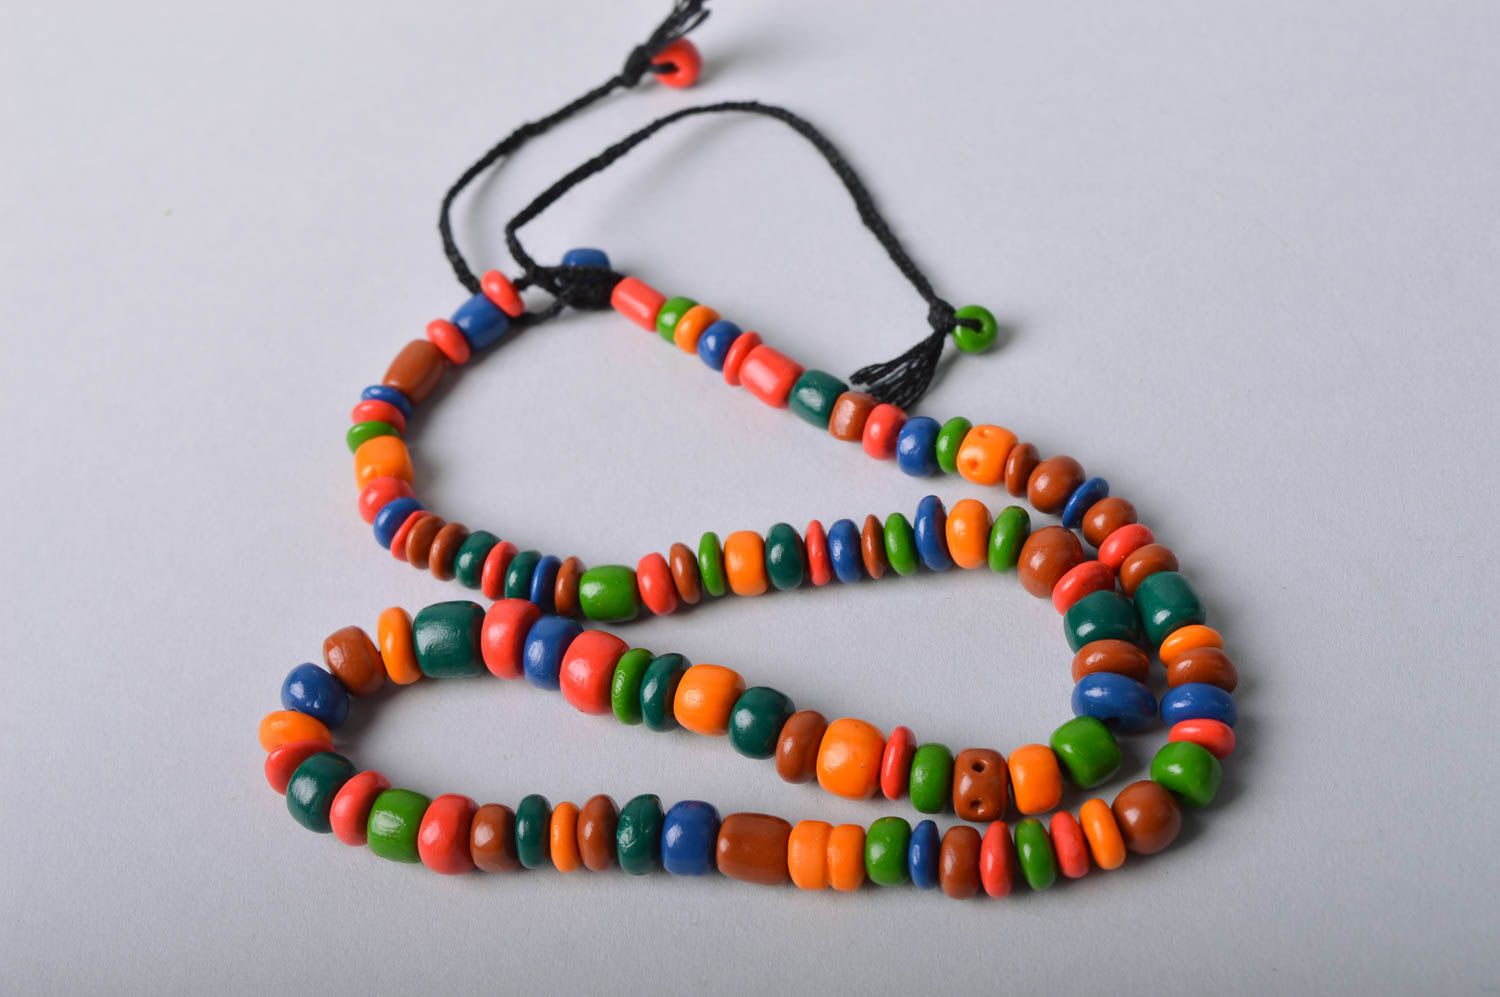 Unusual handmade colorful necklace made of cold porcelain on laces photo 3